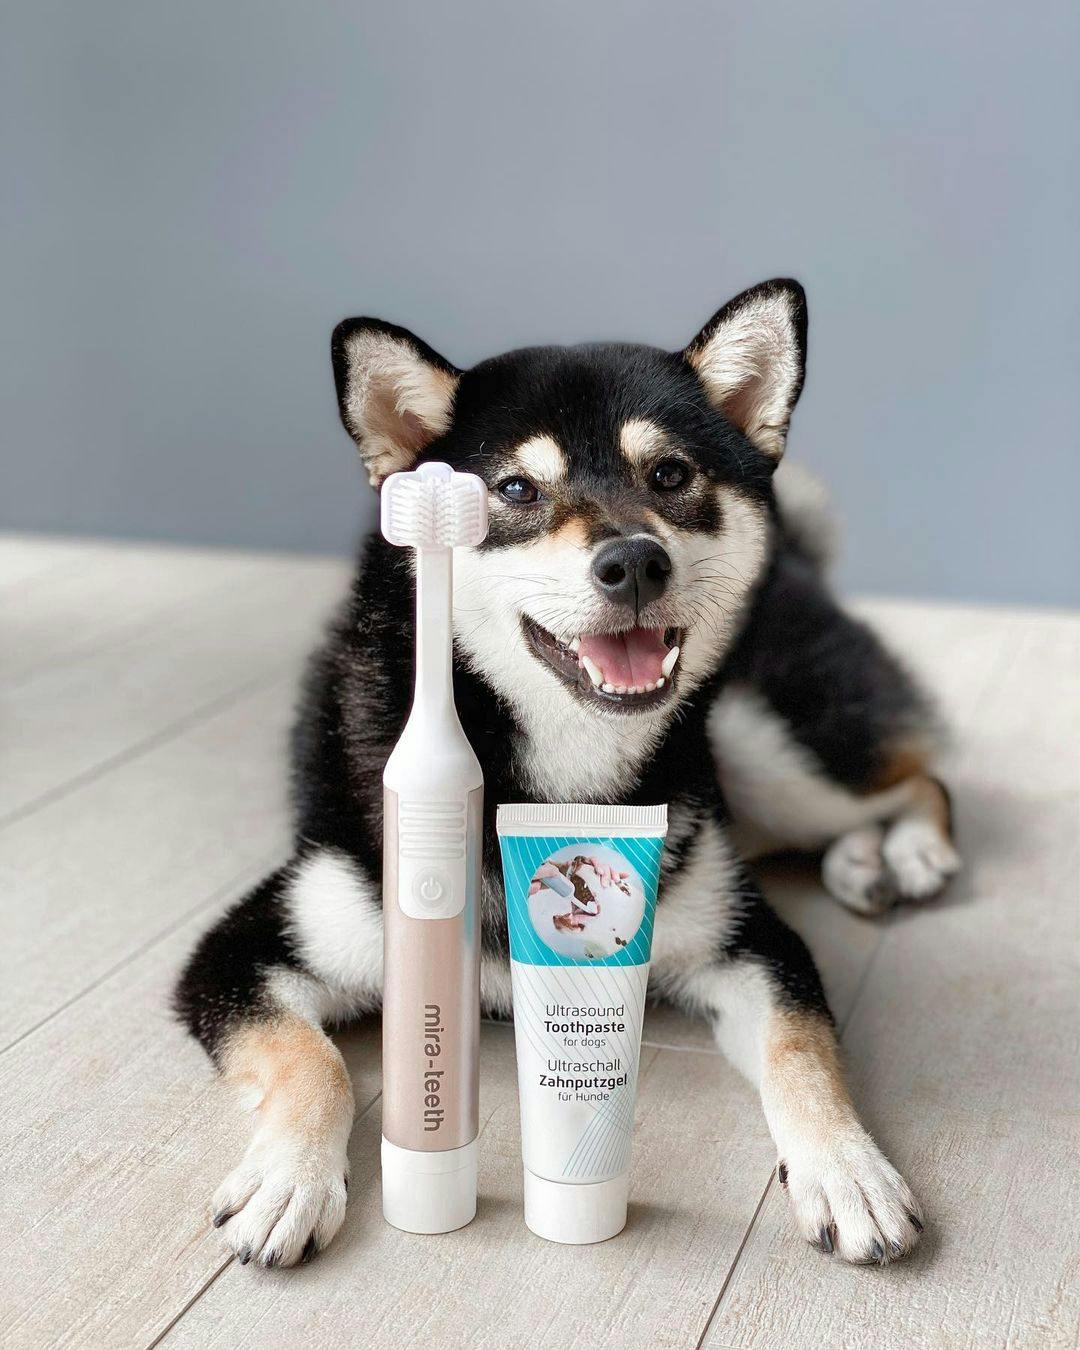 [Product Review] Mira-Pet Ultrasound Toothbrush